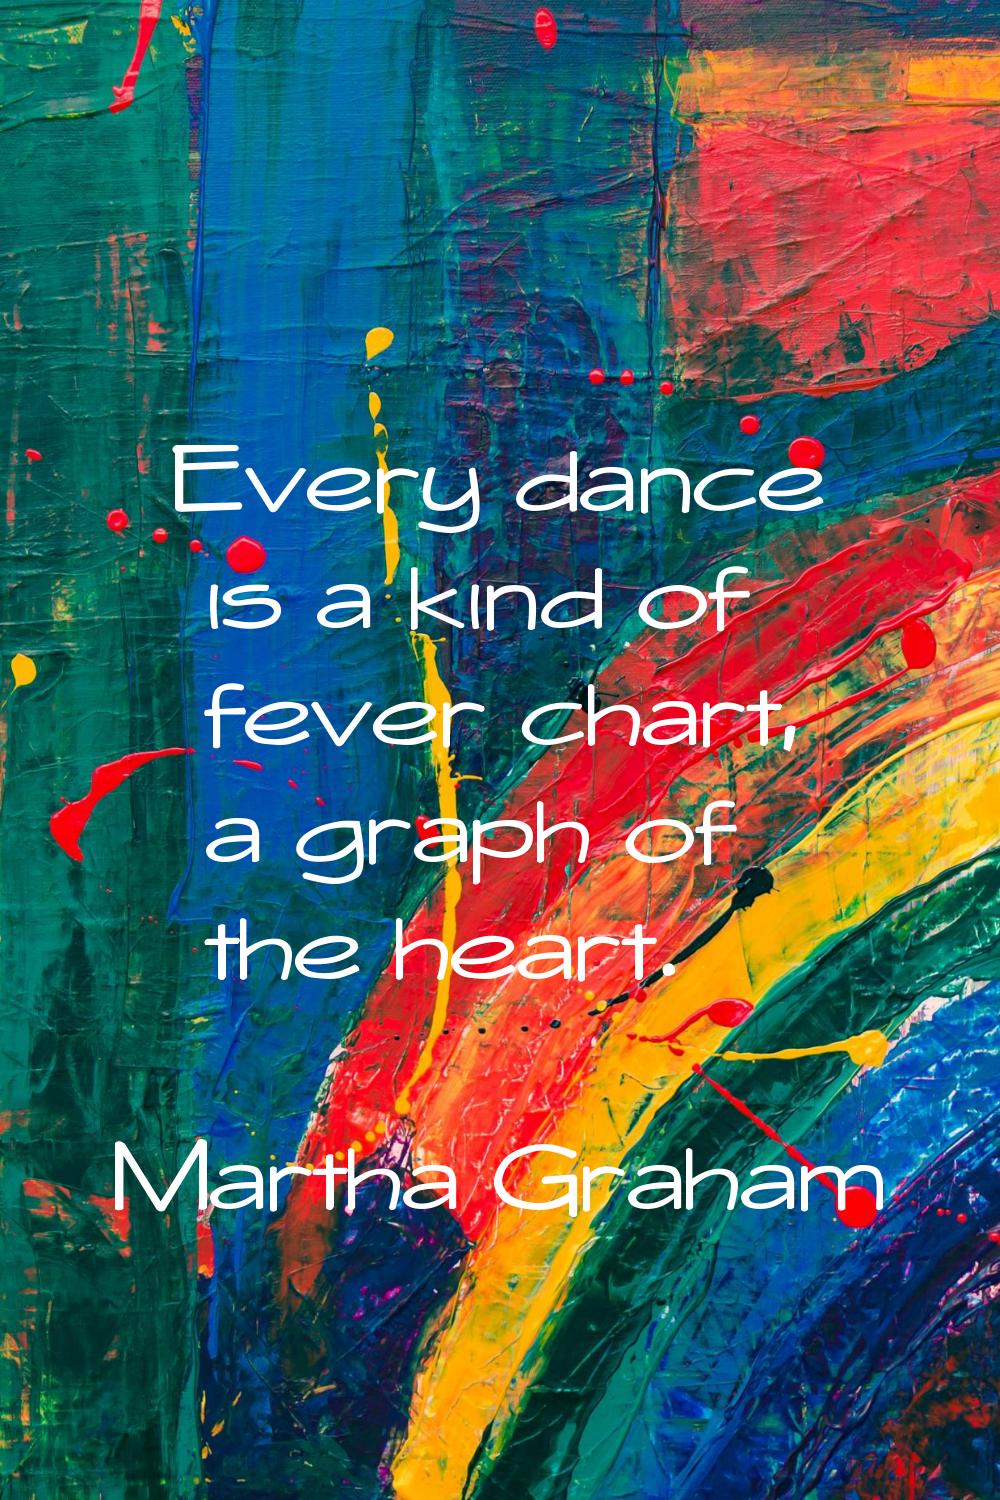 Every dance is a kind of fever chart, a graph of the heart.